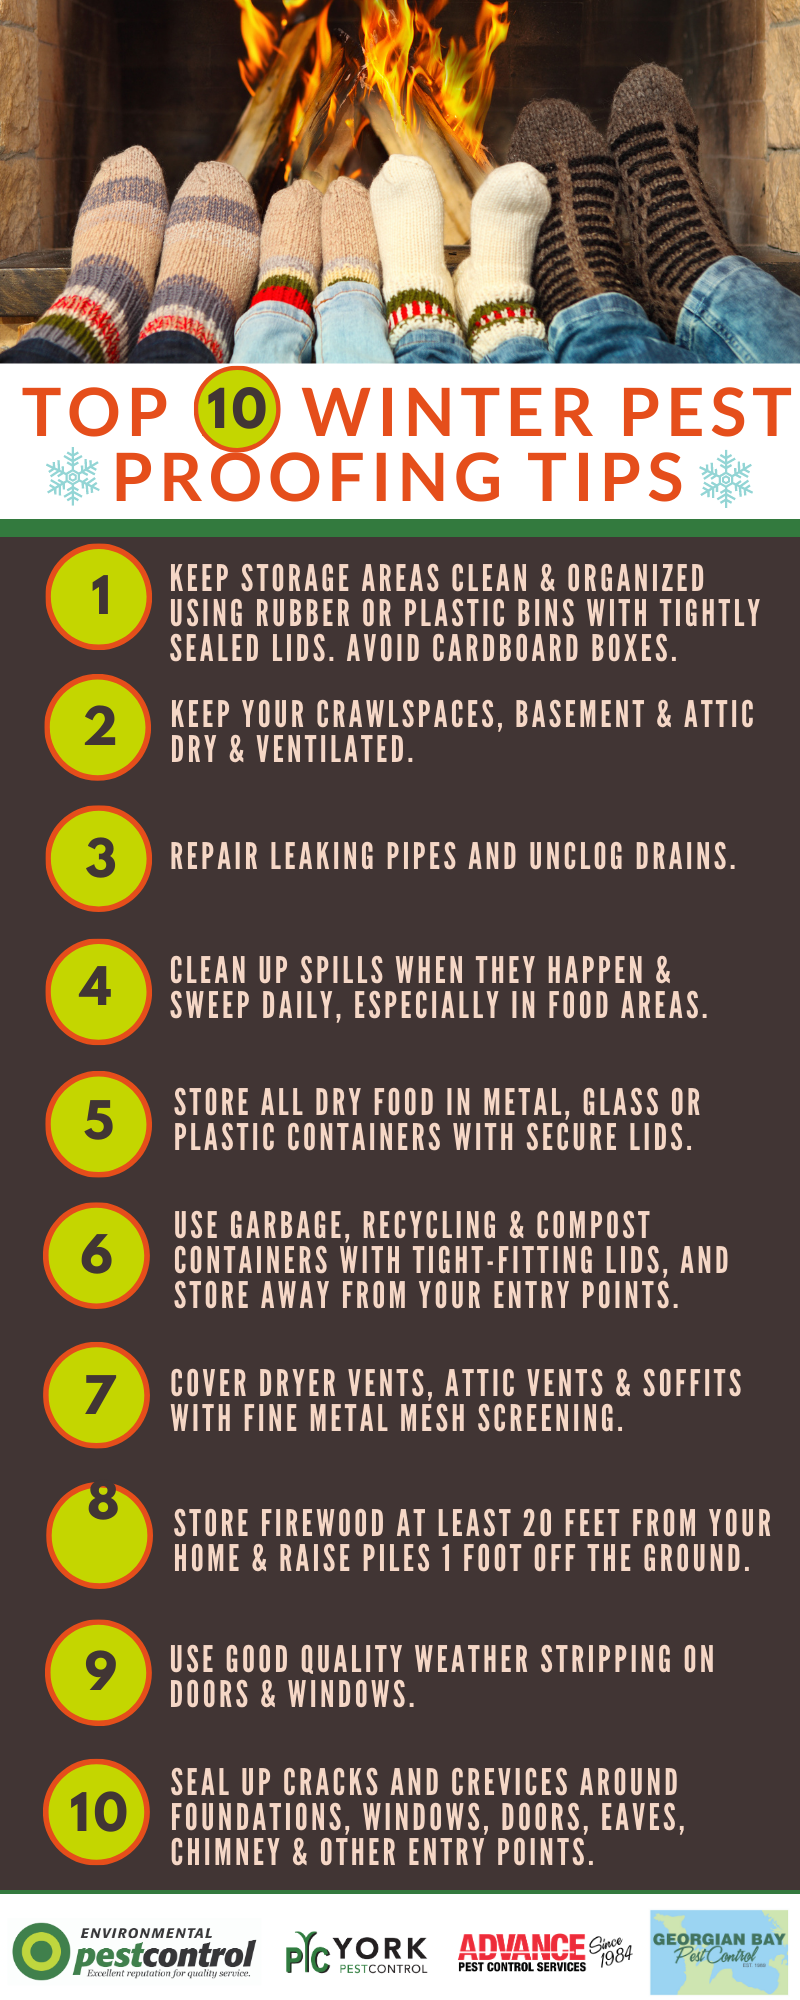 An infographic with 10 tips to help you pest proof over the winter